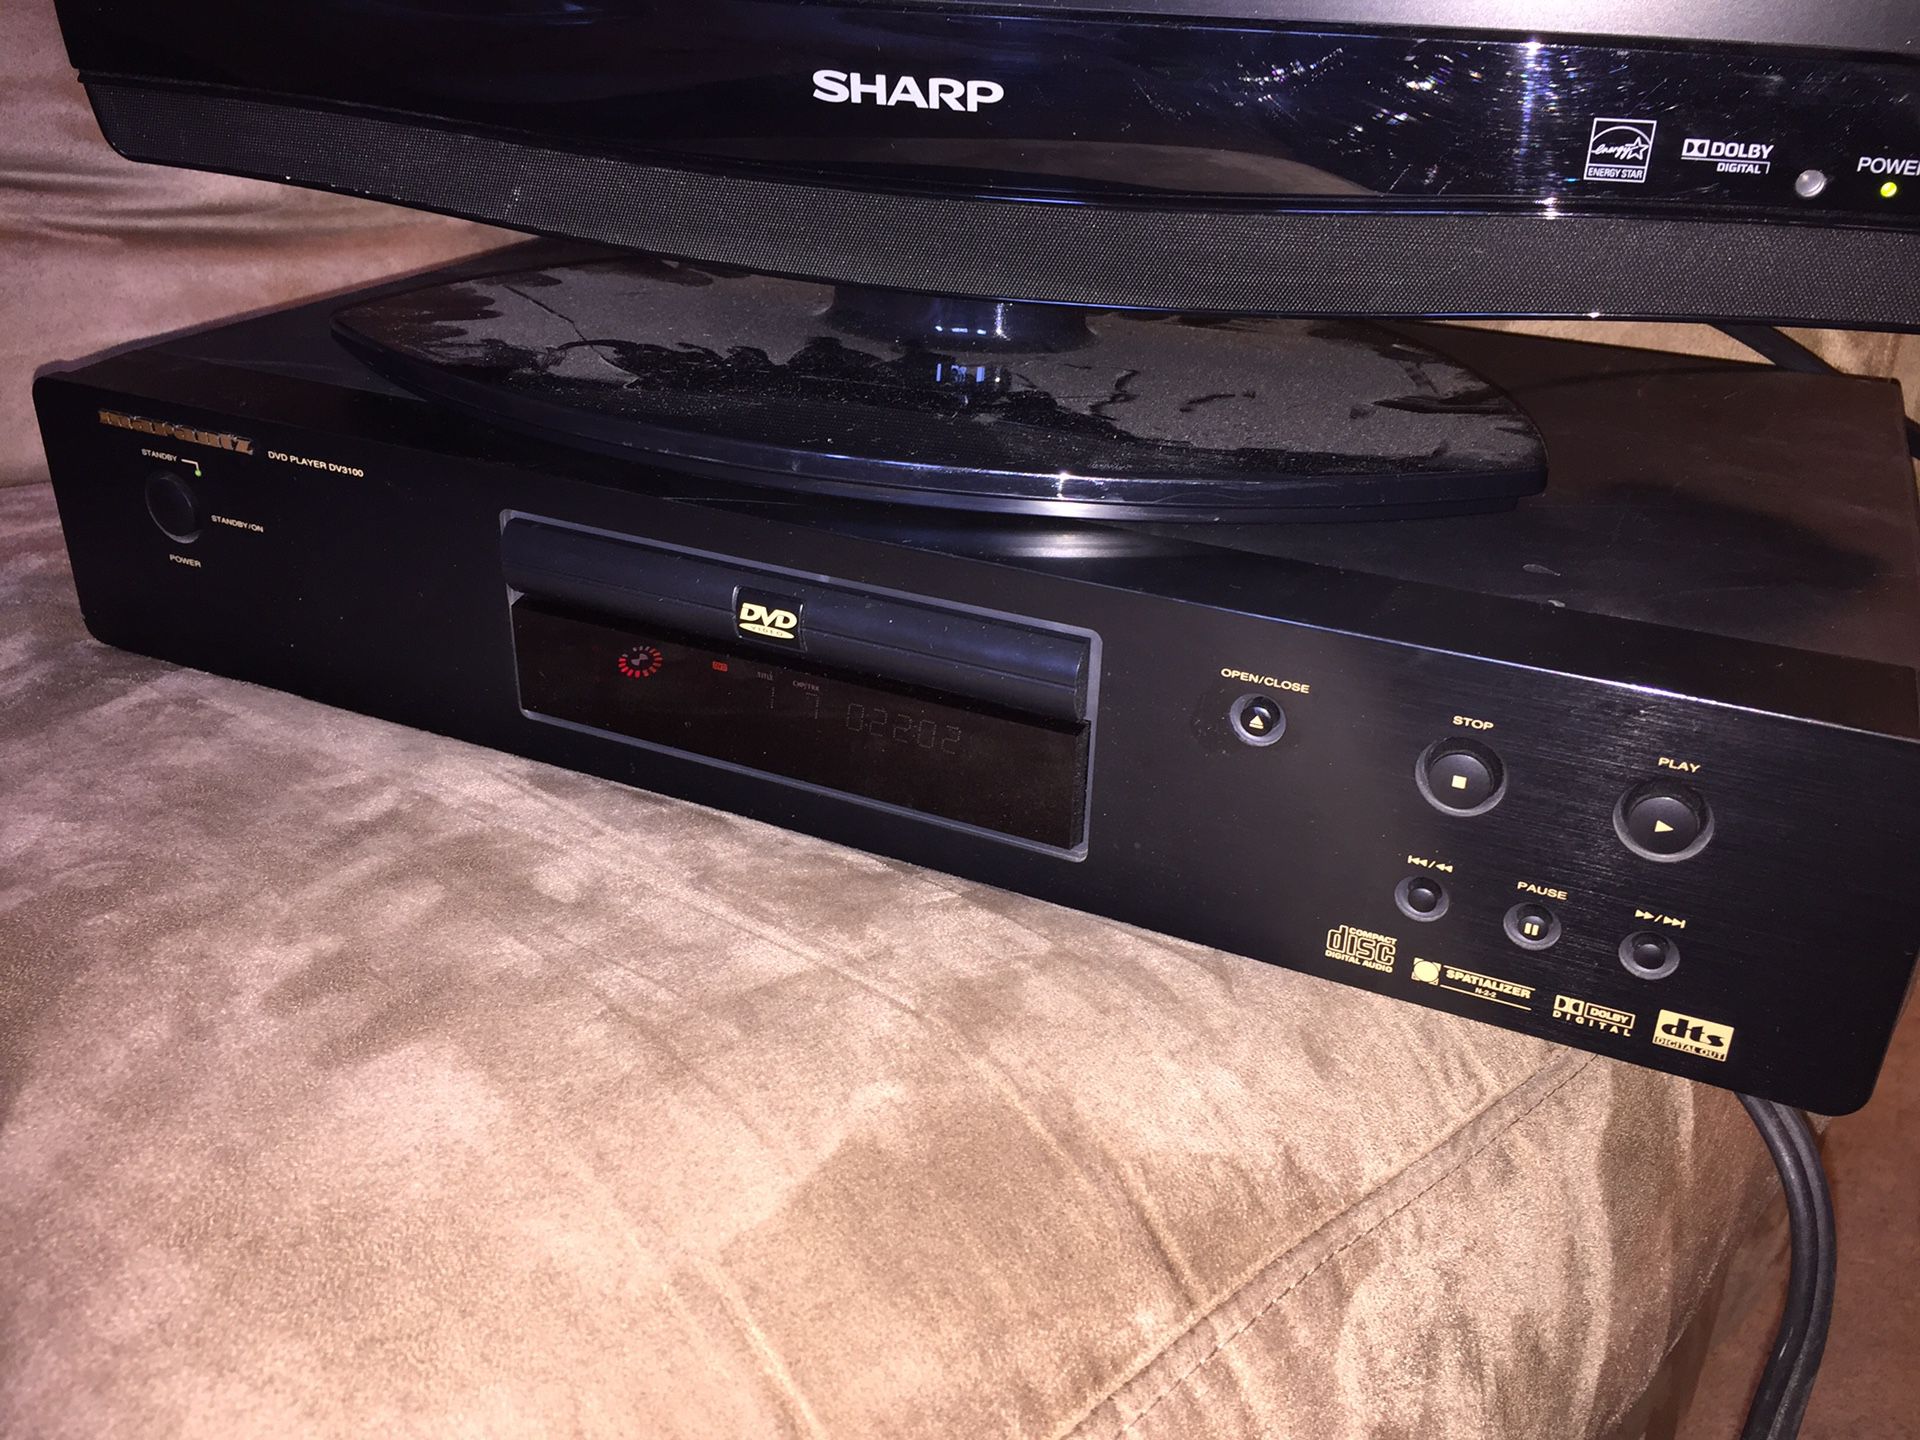 Marantz DV3100 DVD player with remote works perfectly